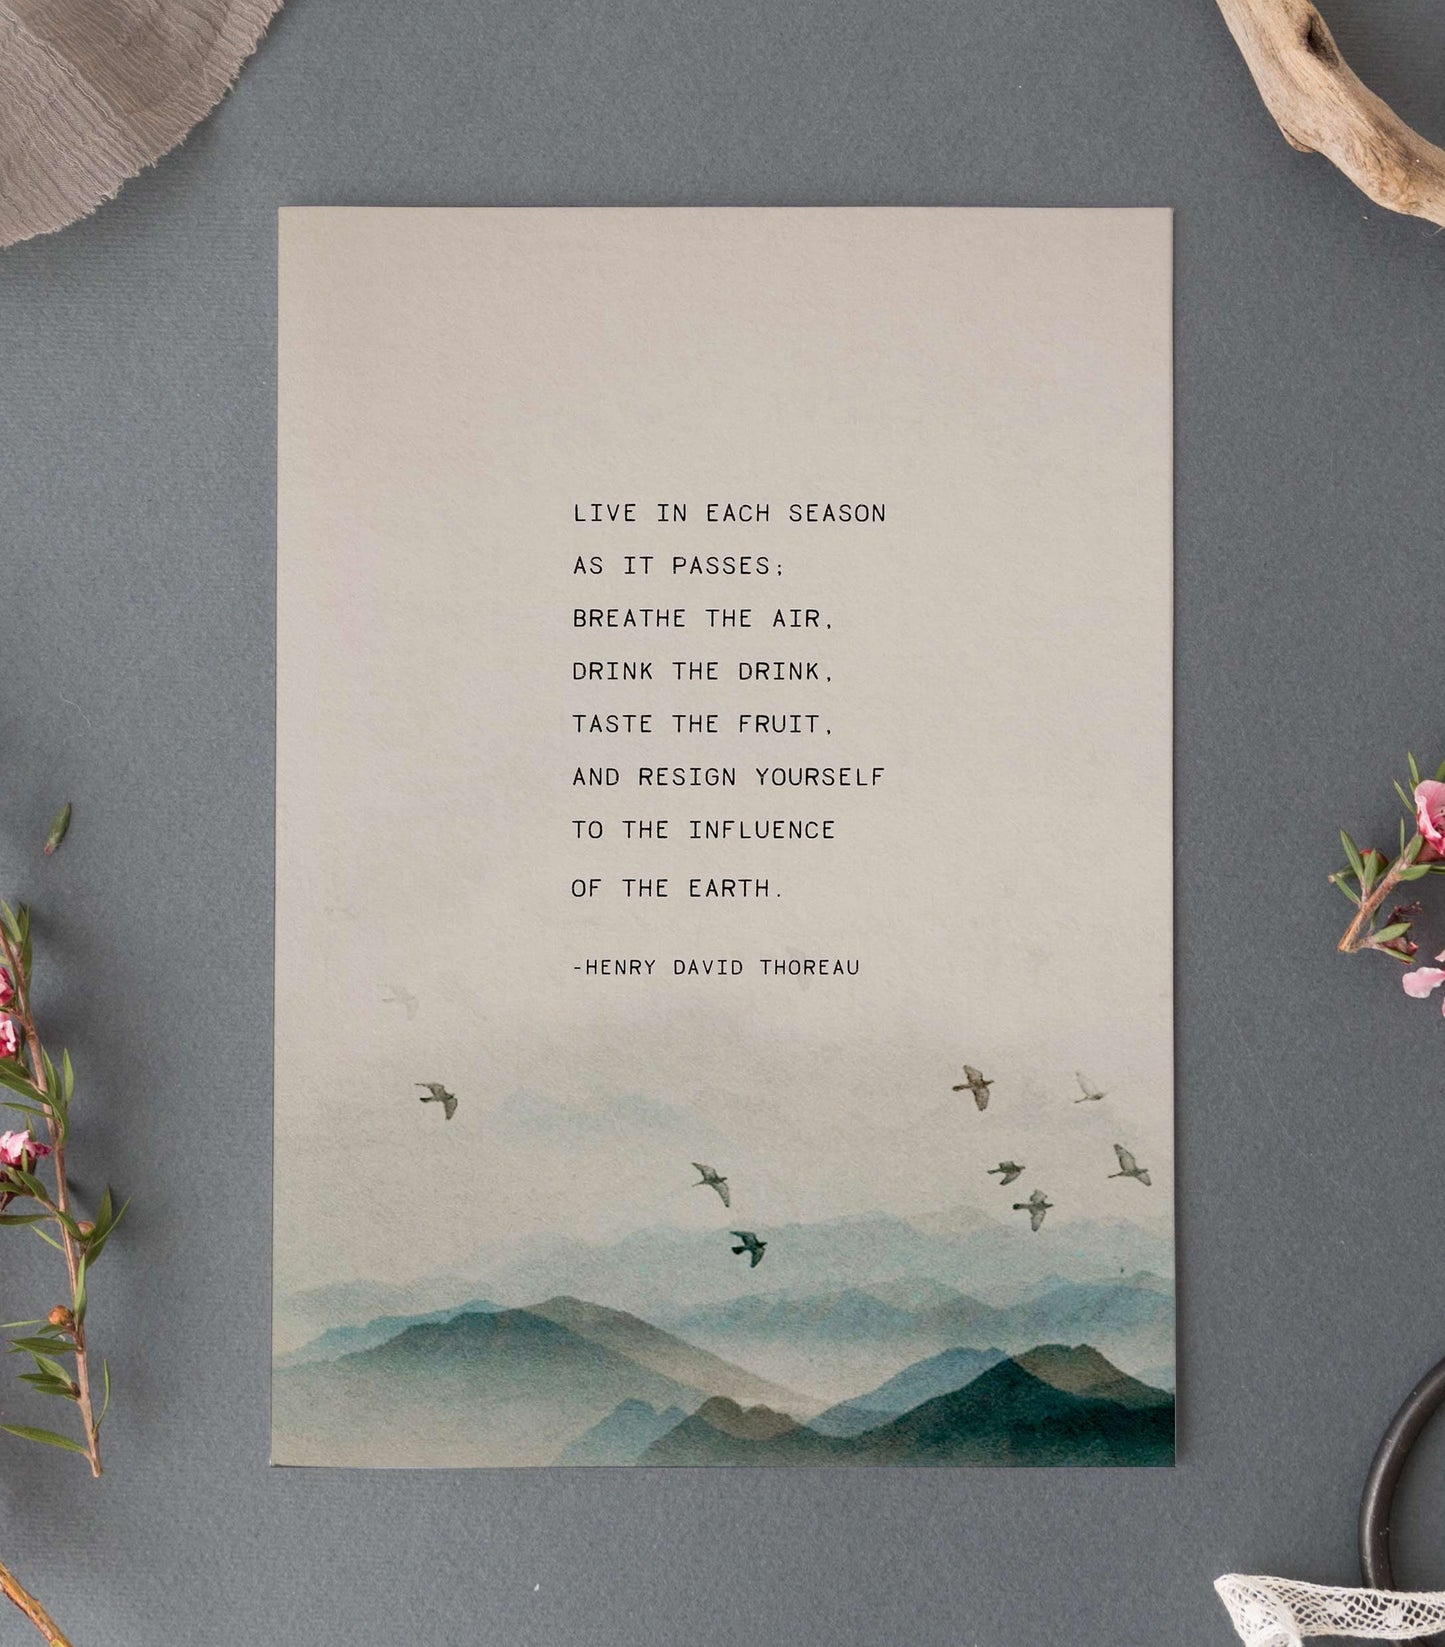 Henry David Thoreau Quote set on a watercolor image of mountains and birds